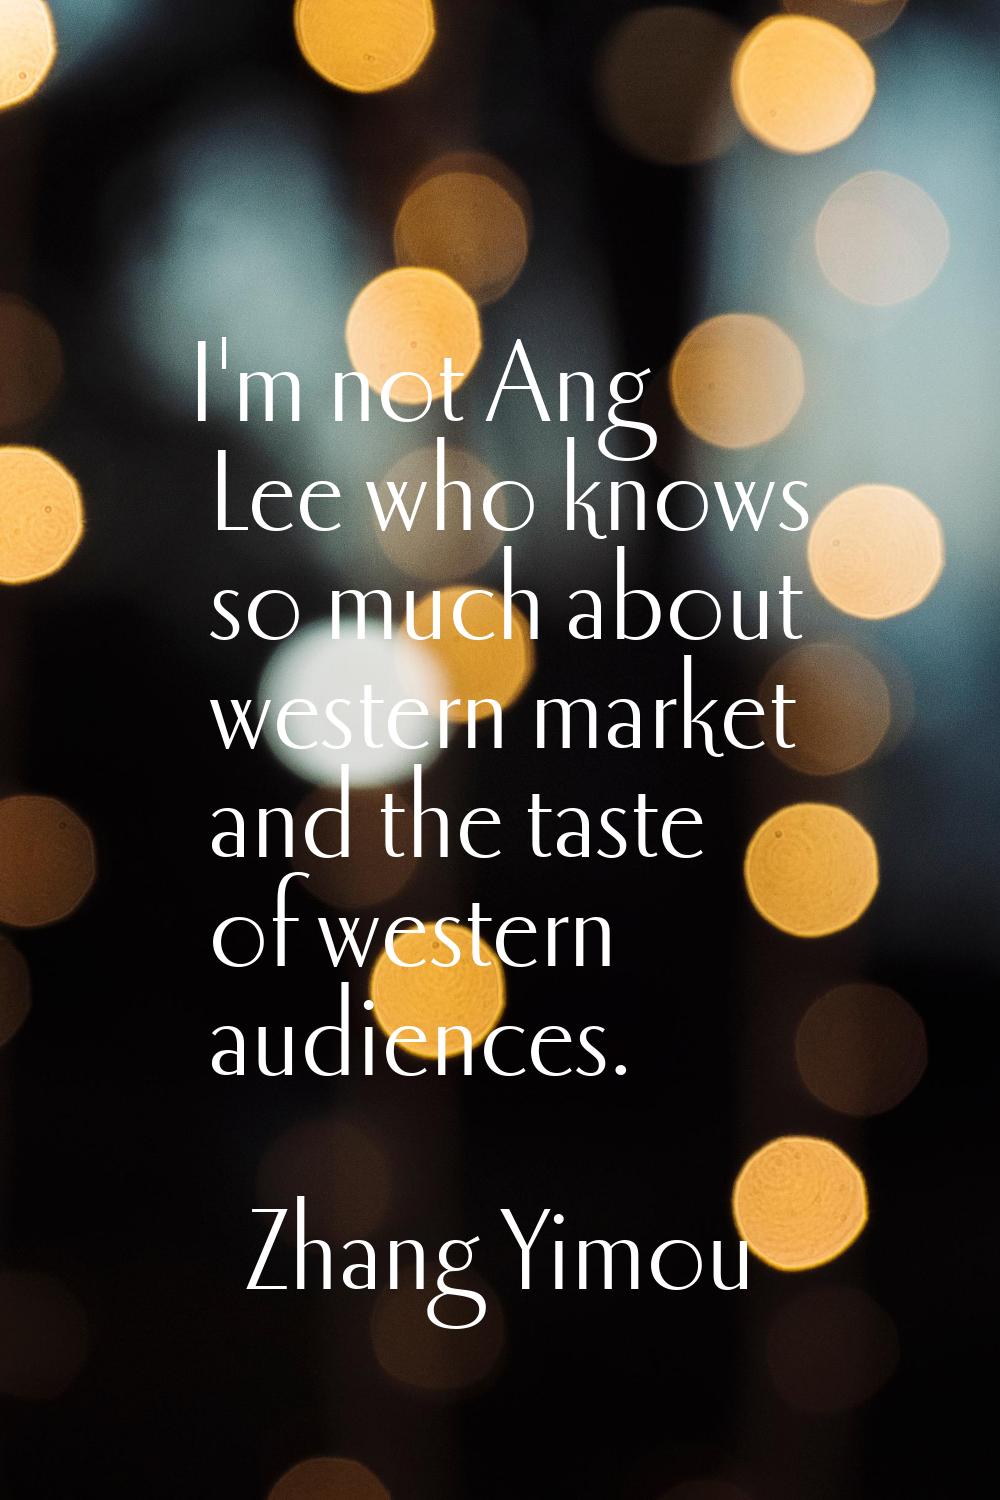 I'm not Ang Lee who knows so much about western market and the taste of western audiences.